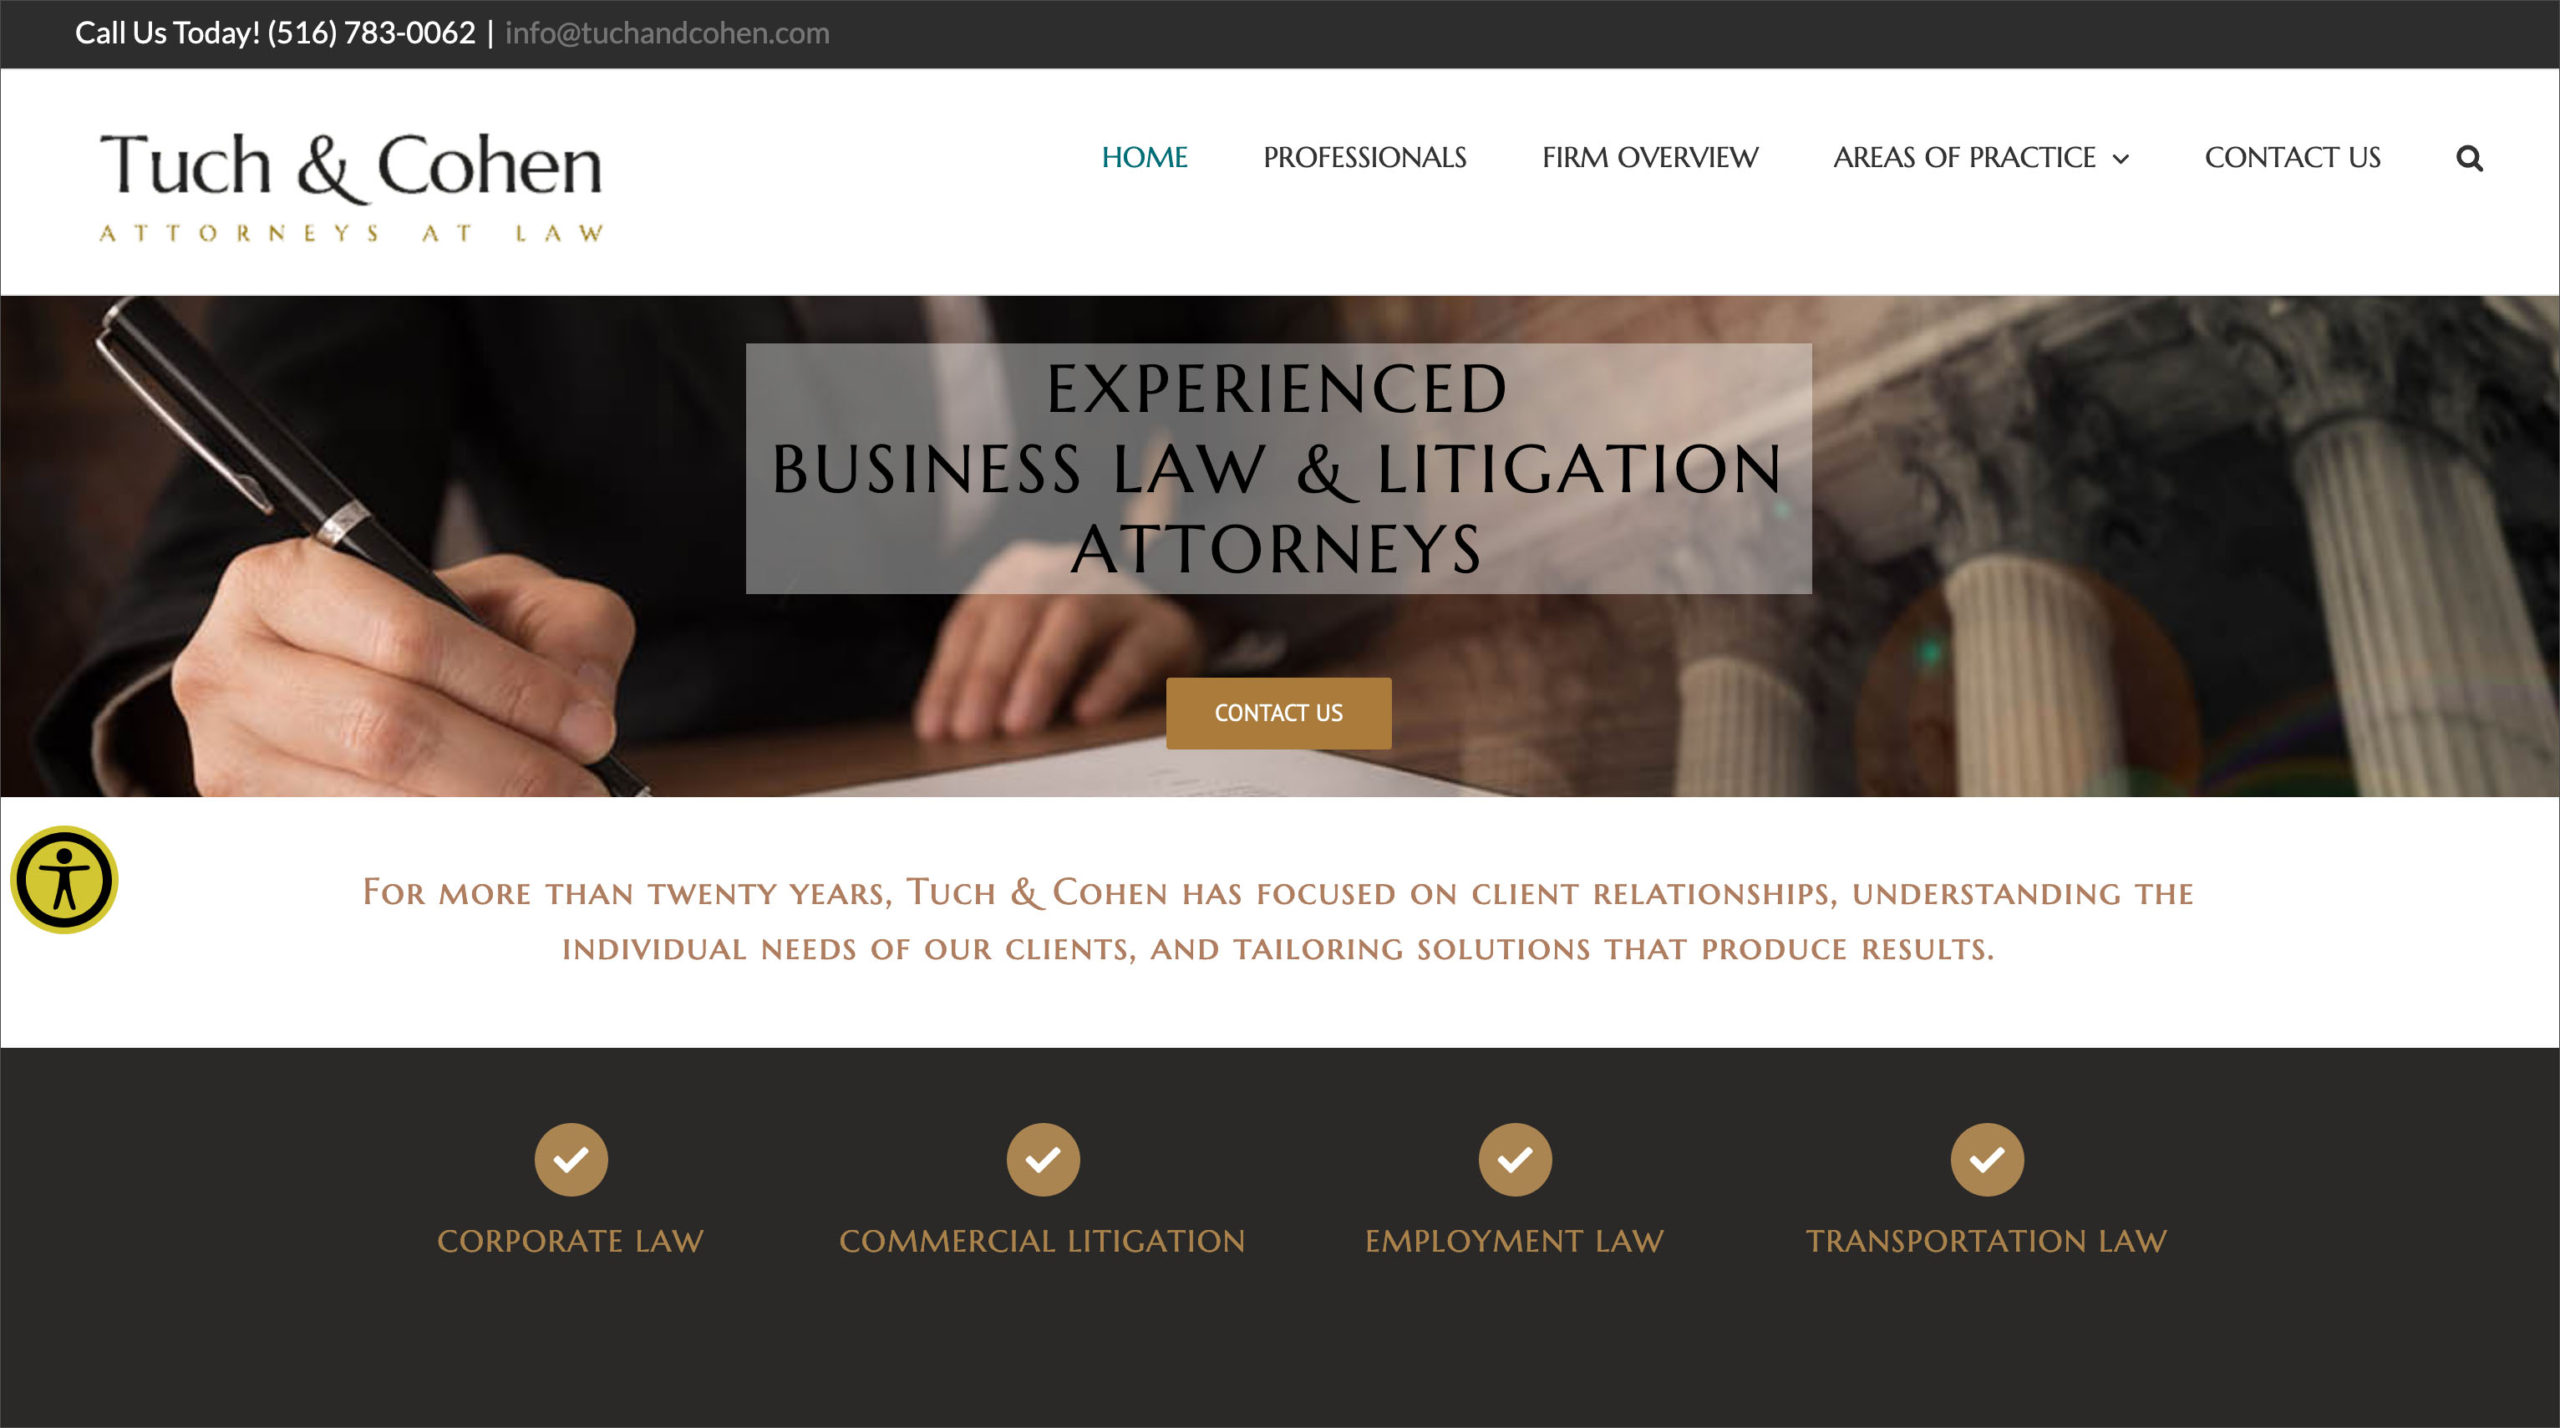 Tuch & Cohen Attorneys at law